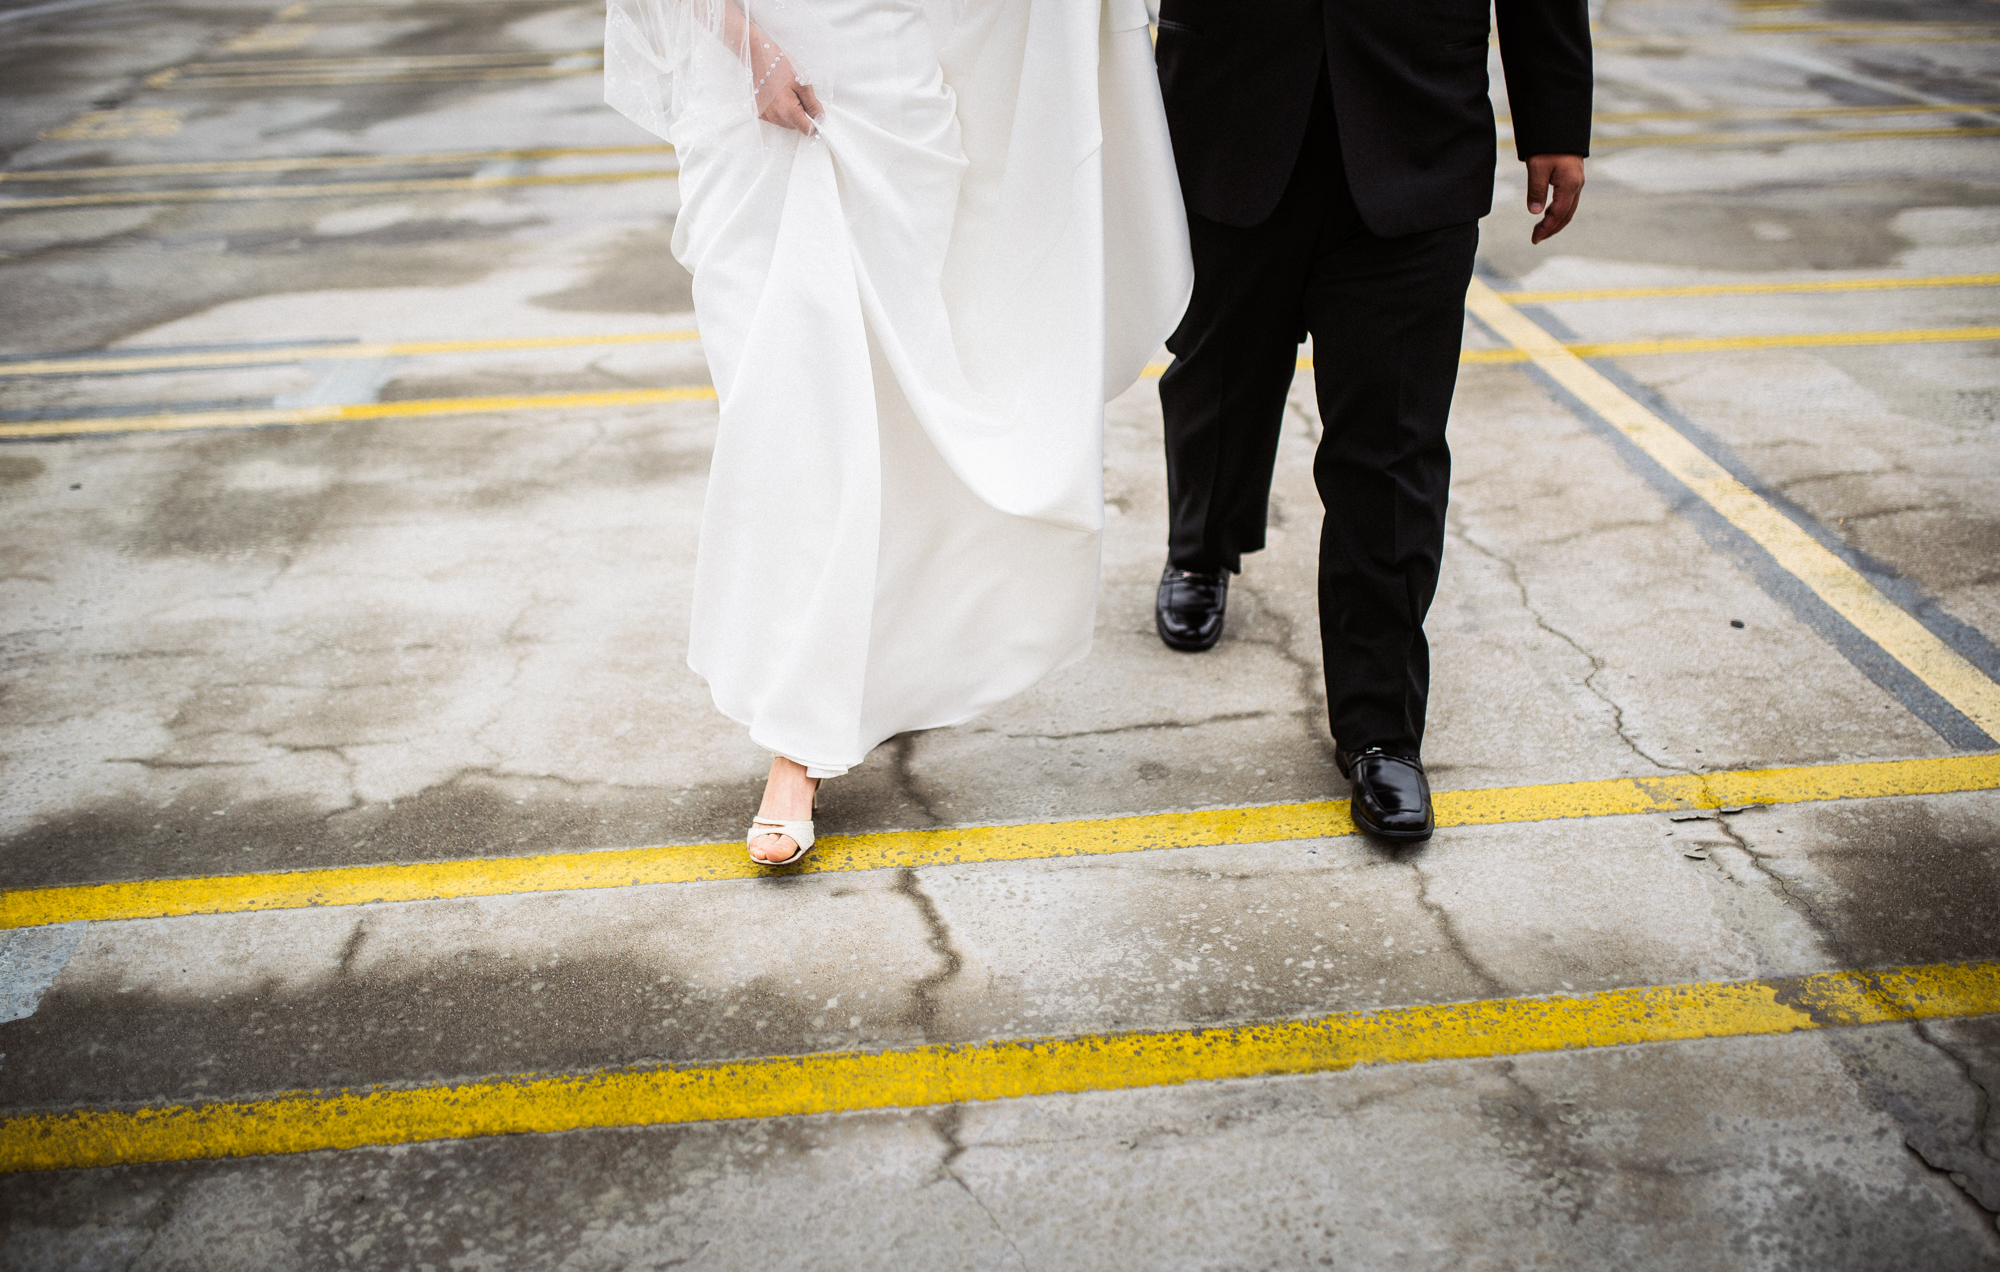 ©Isaiah & Taylor Photography - Destination Wedding Photographers - Downtown Los Angeles Parking Lot Rooftop Wedding-010.jpg